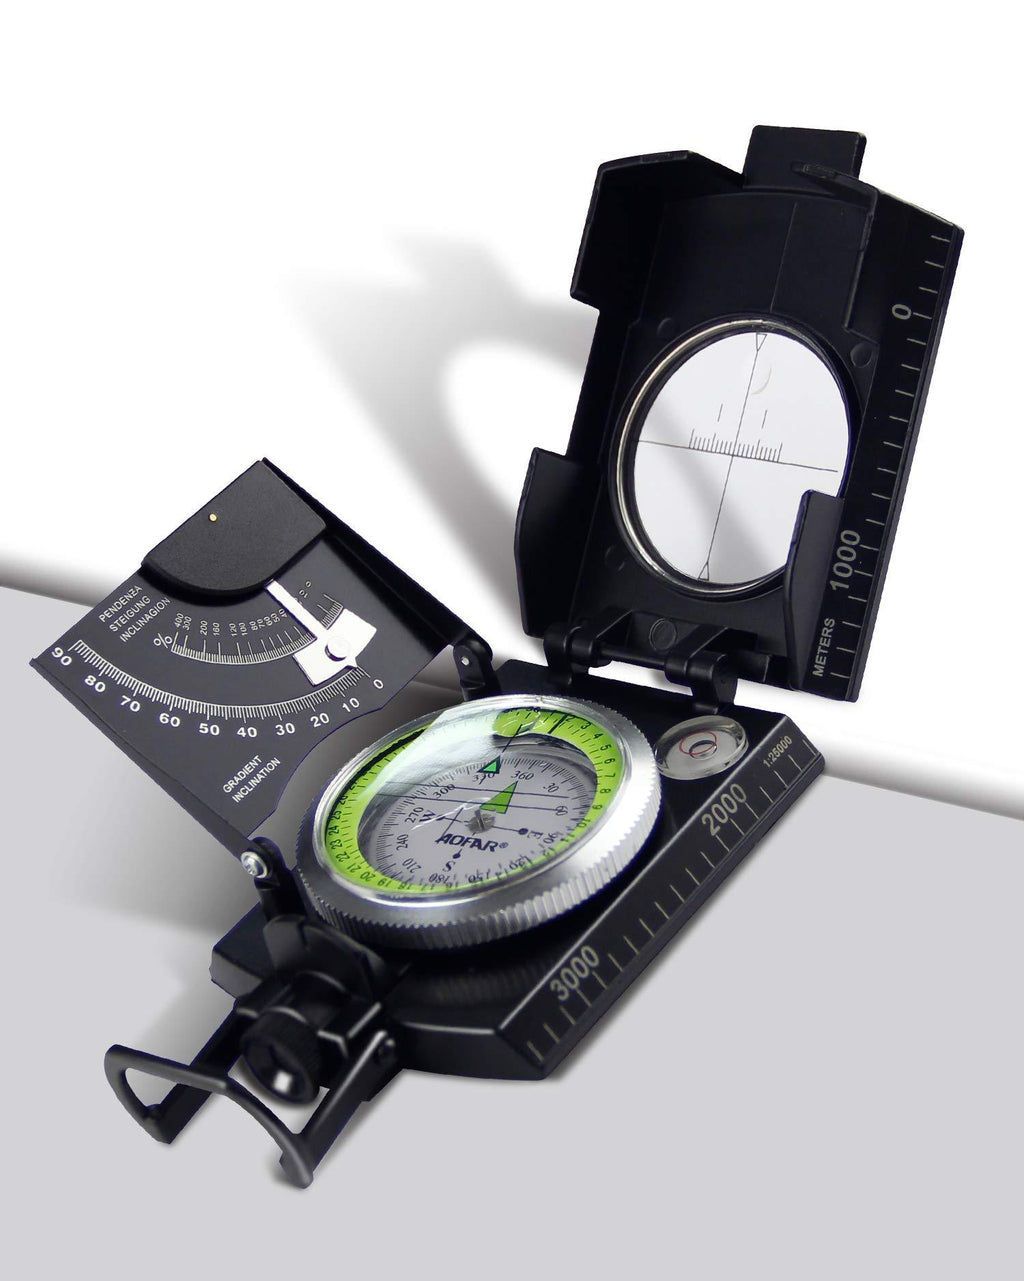 AOFAR Military Compass AF-4074 Camo for Hiking,Lensatic Sighting Waterproof,Durable,Inclinometer for Camping,Boy Scount,Geology Activities Boating Black - BeesActive Australia